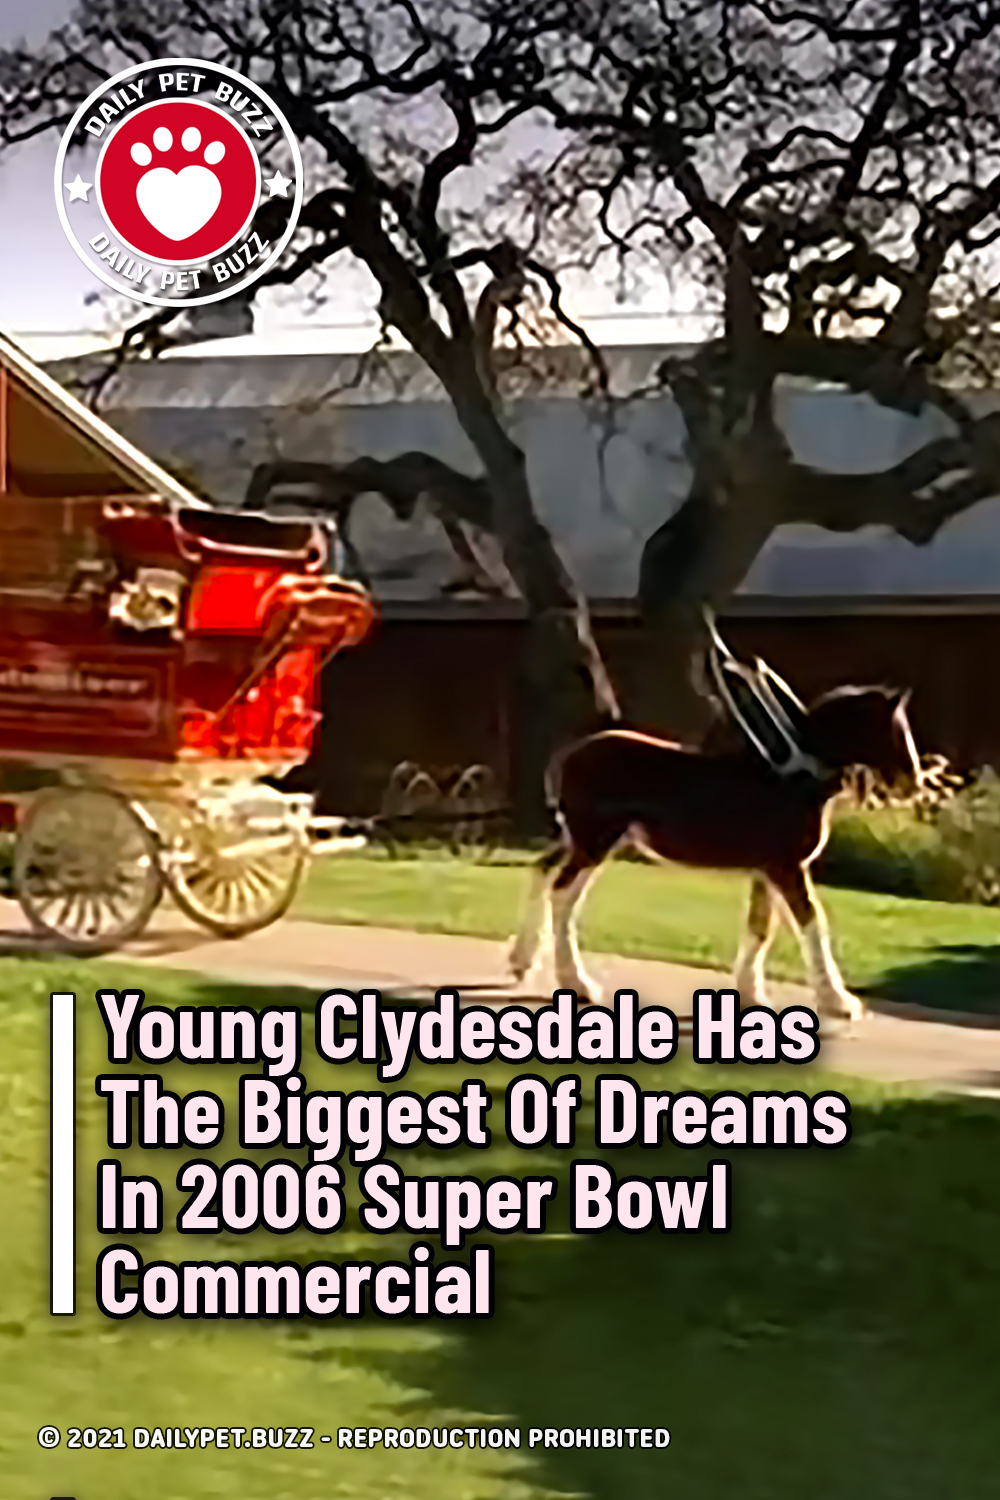 Young Clydesdale Has The Biggest Of Dreams In 2006 Super Bowl Commercial